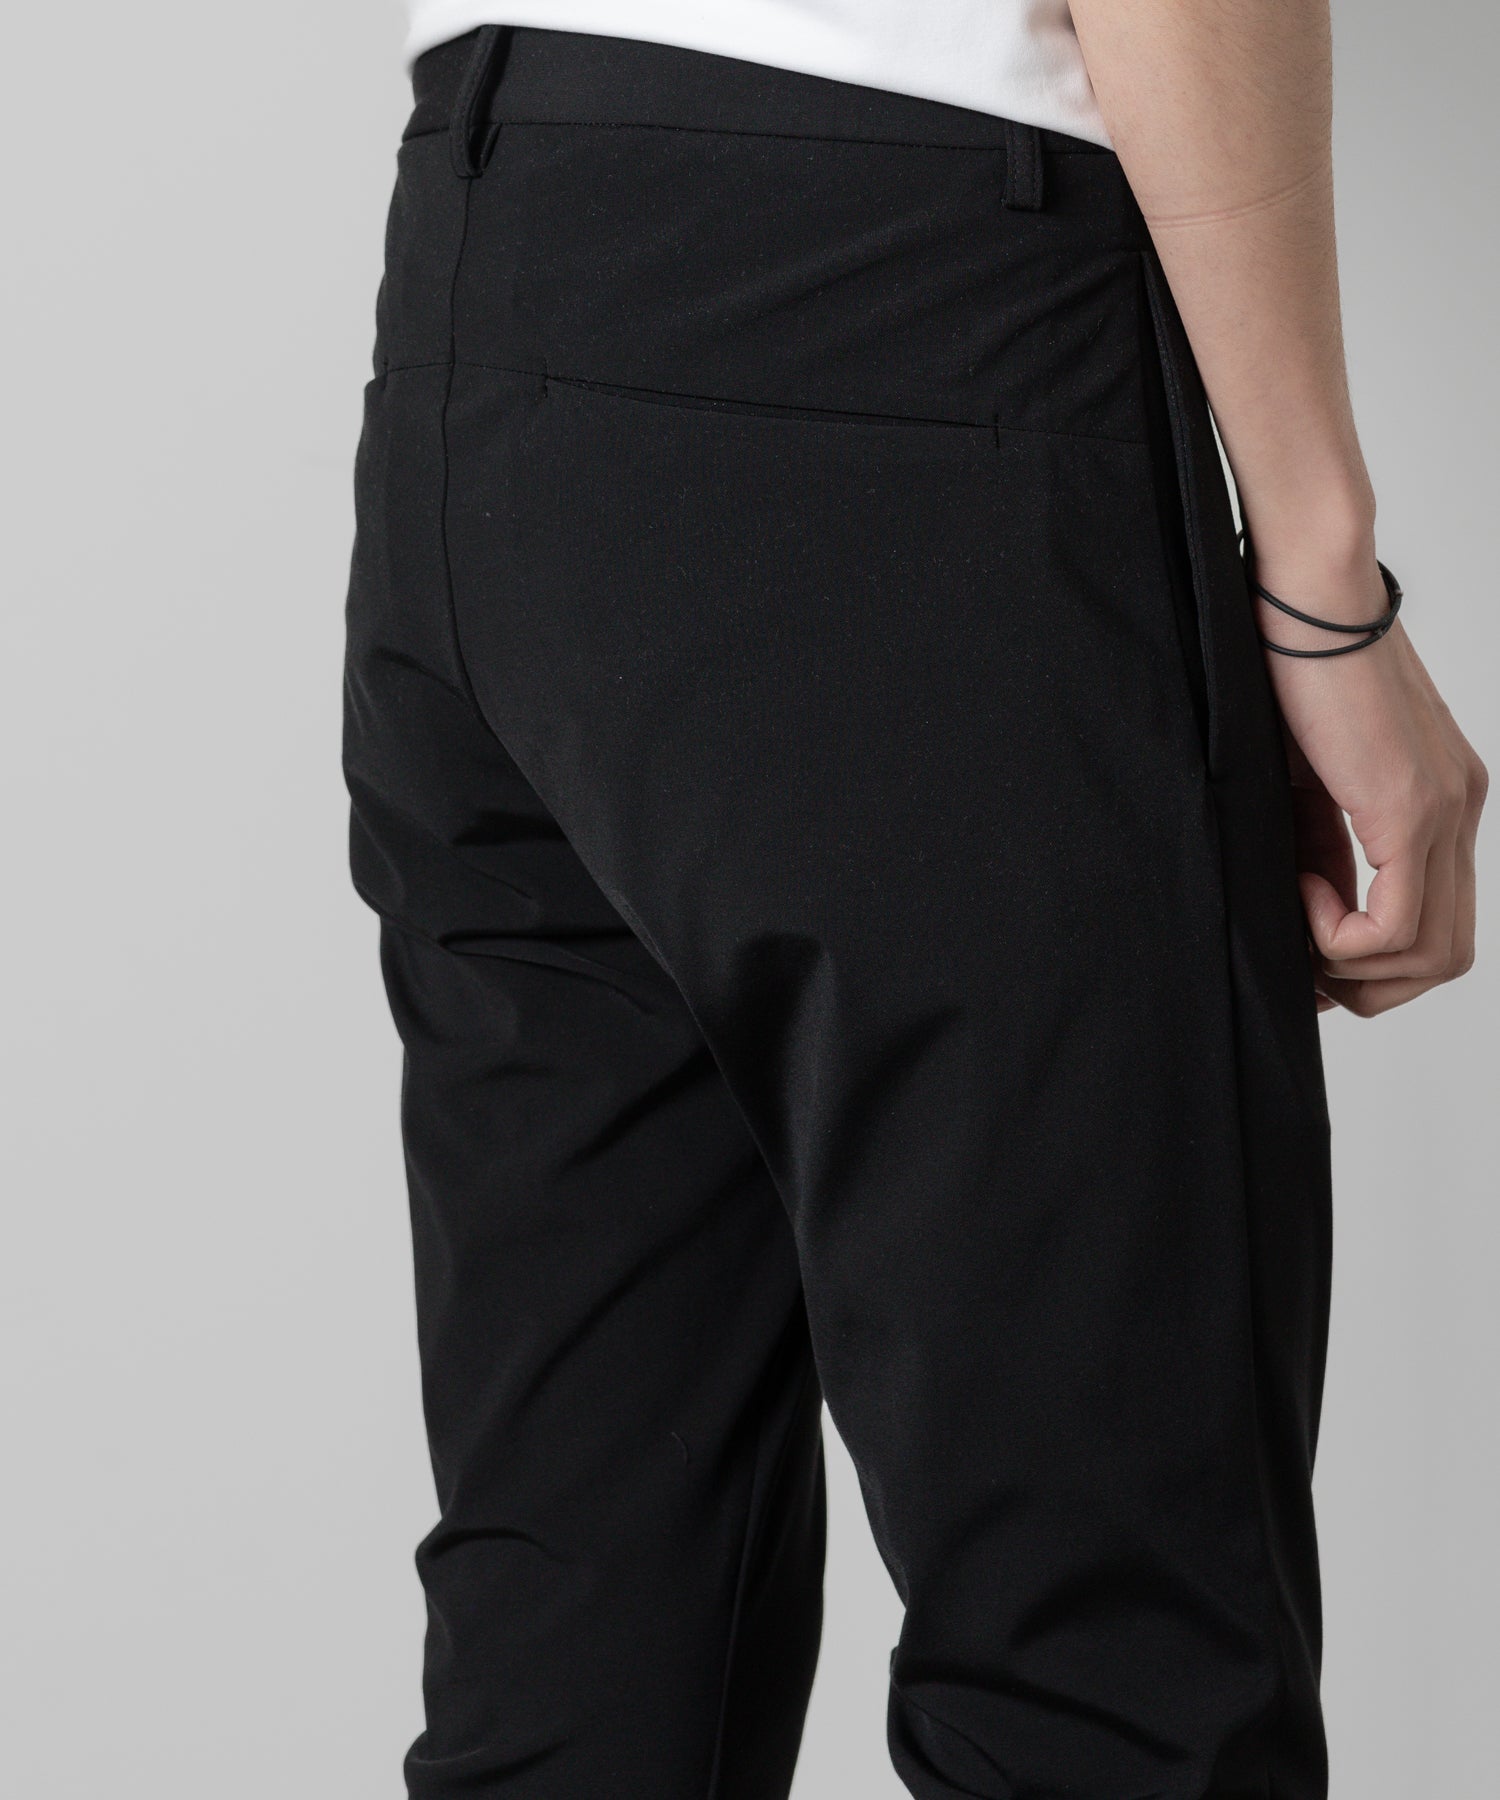 【ATTACHMENT】ATTACHMENT アタッチメントのNY/CO STRETCH JERSEY NARROW TROUSERS - BALCK 公式通販サイトsession福岡セレクトショップ